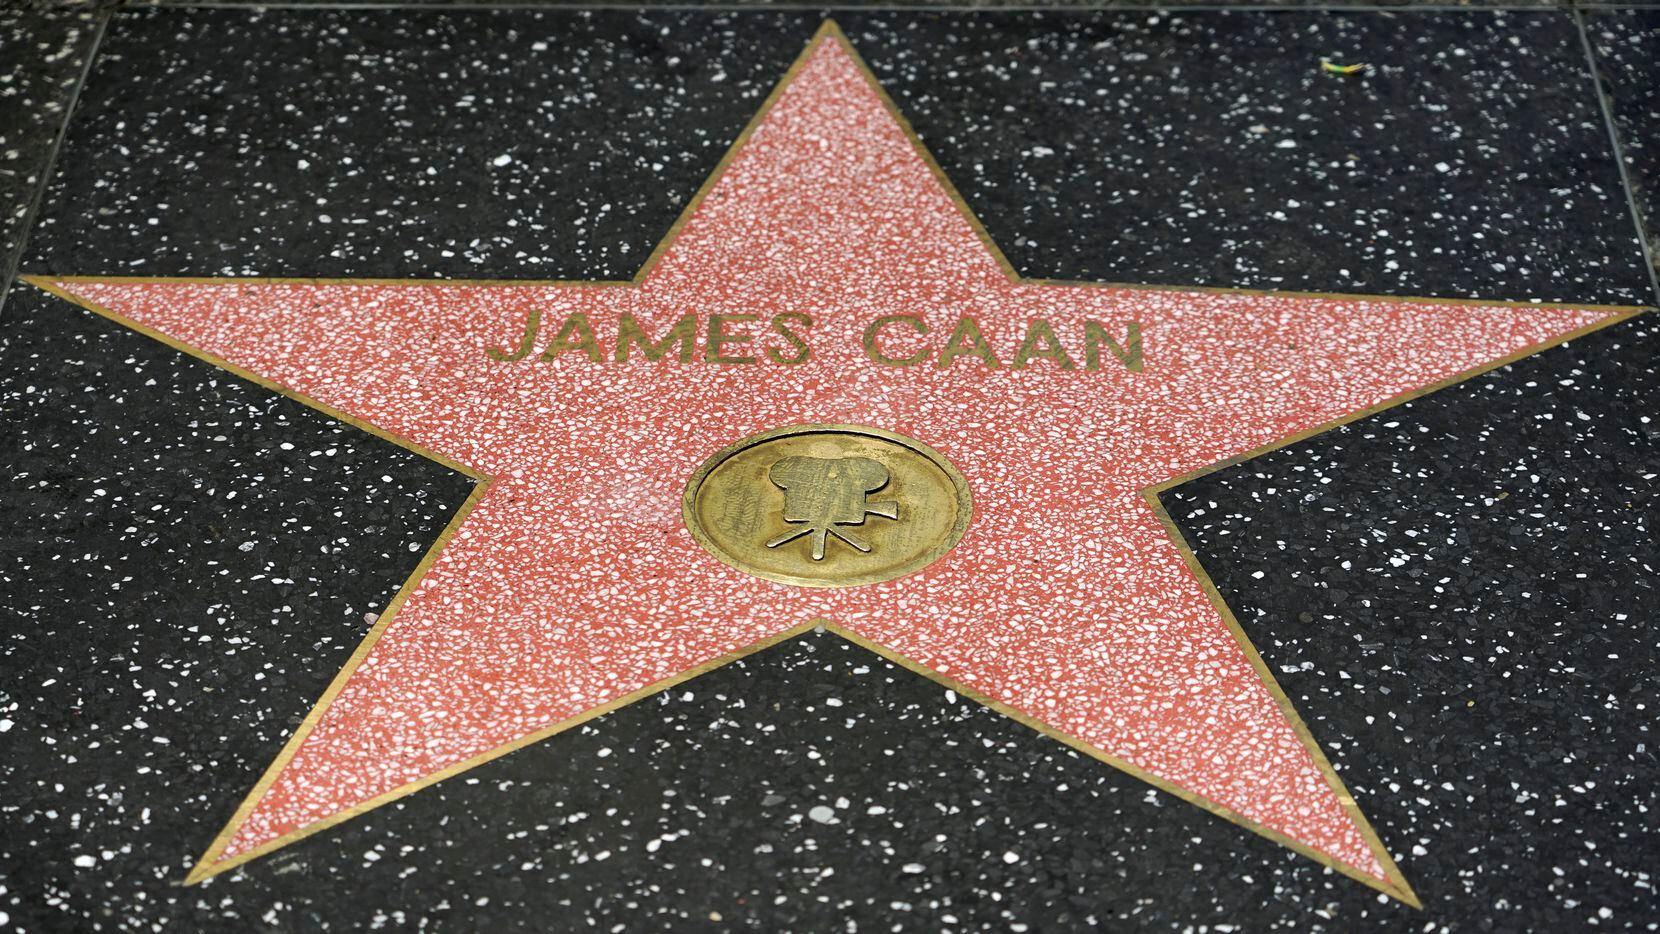 The Hollywood Walk of Fame star of the late actor James Caan is pictured, Thursday, July 7,...